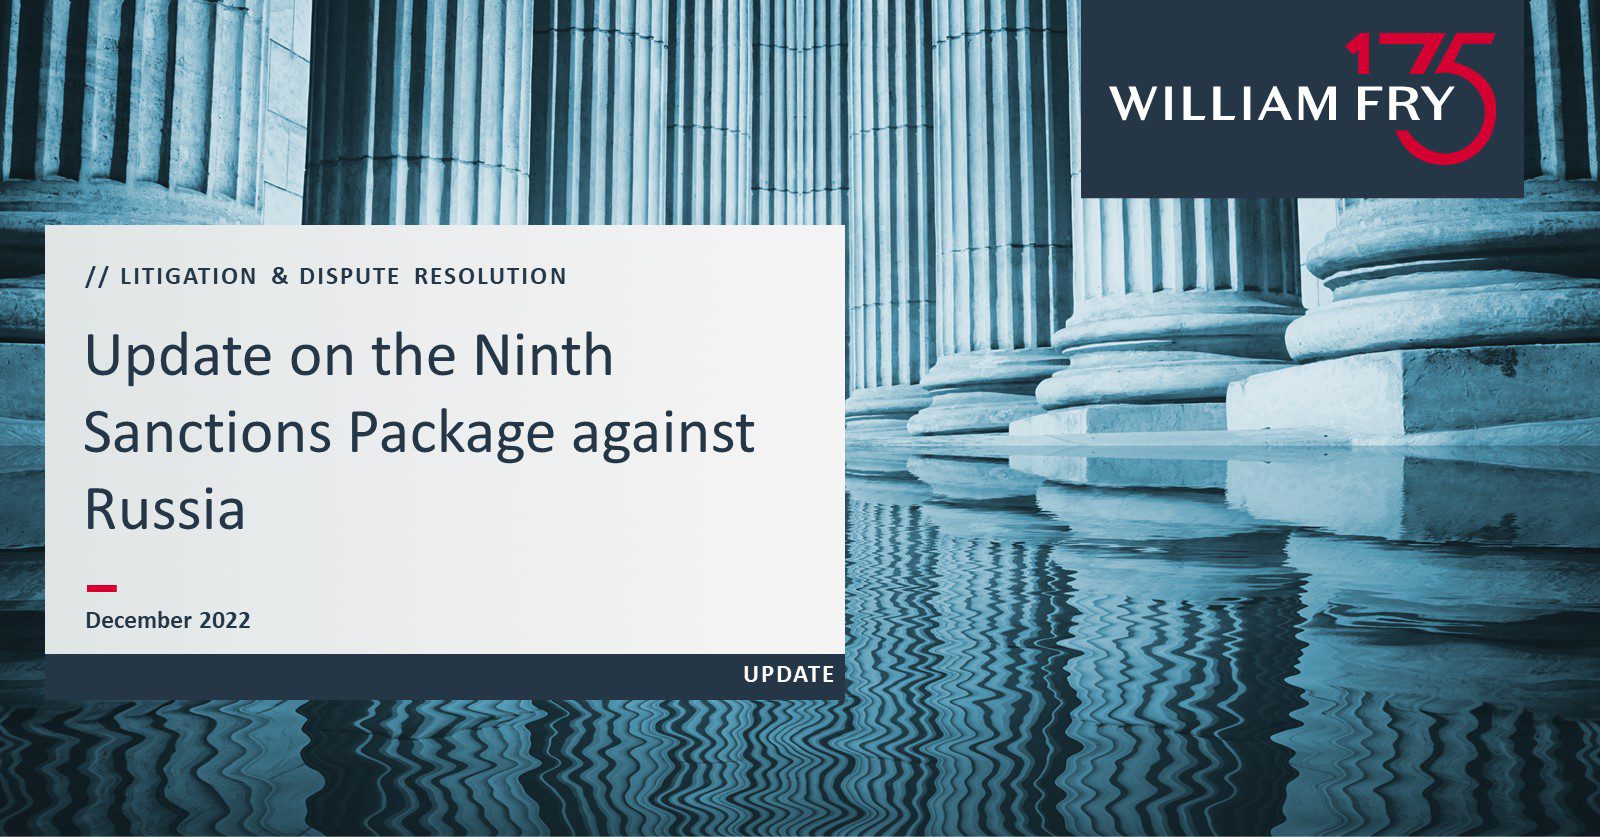 Update on the Ninth Sanctions Package